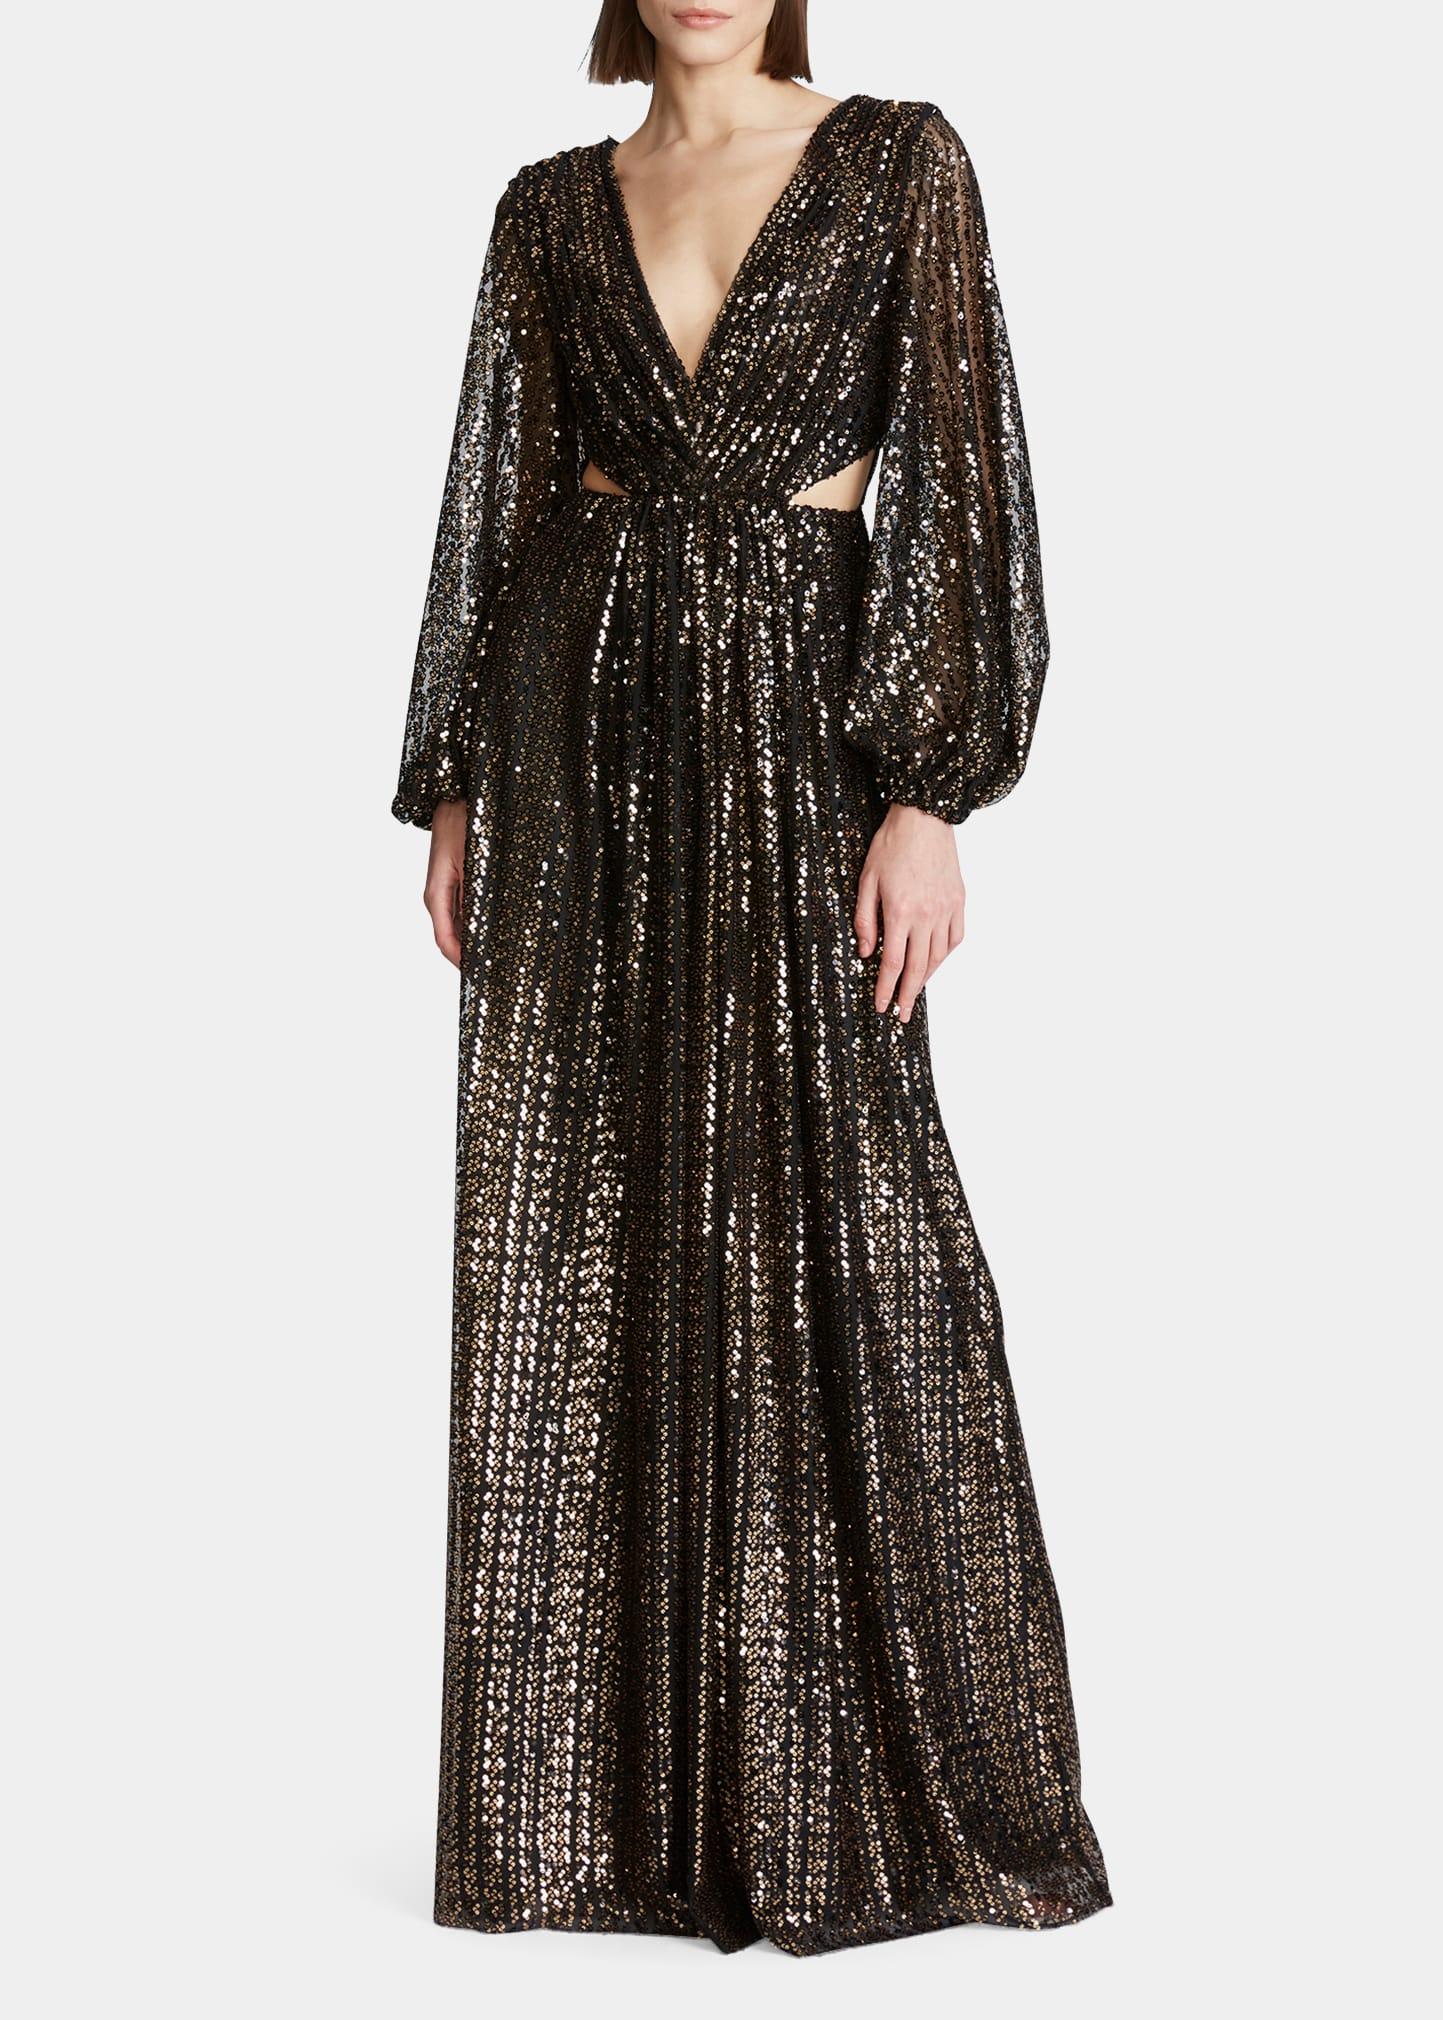 Halston Madelyn Sequin Evening Gown in Black | Lyst